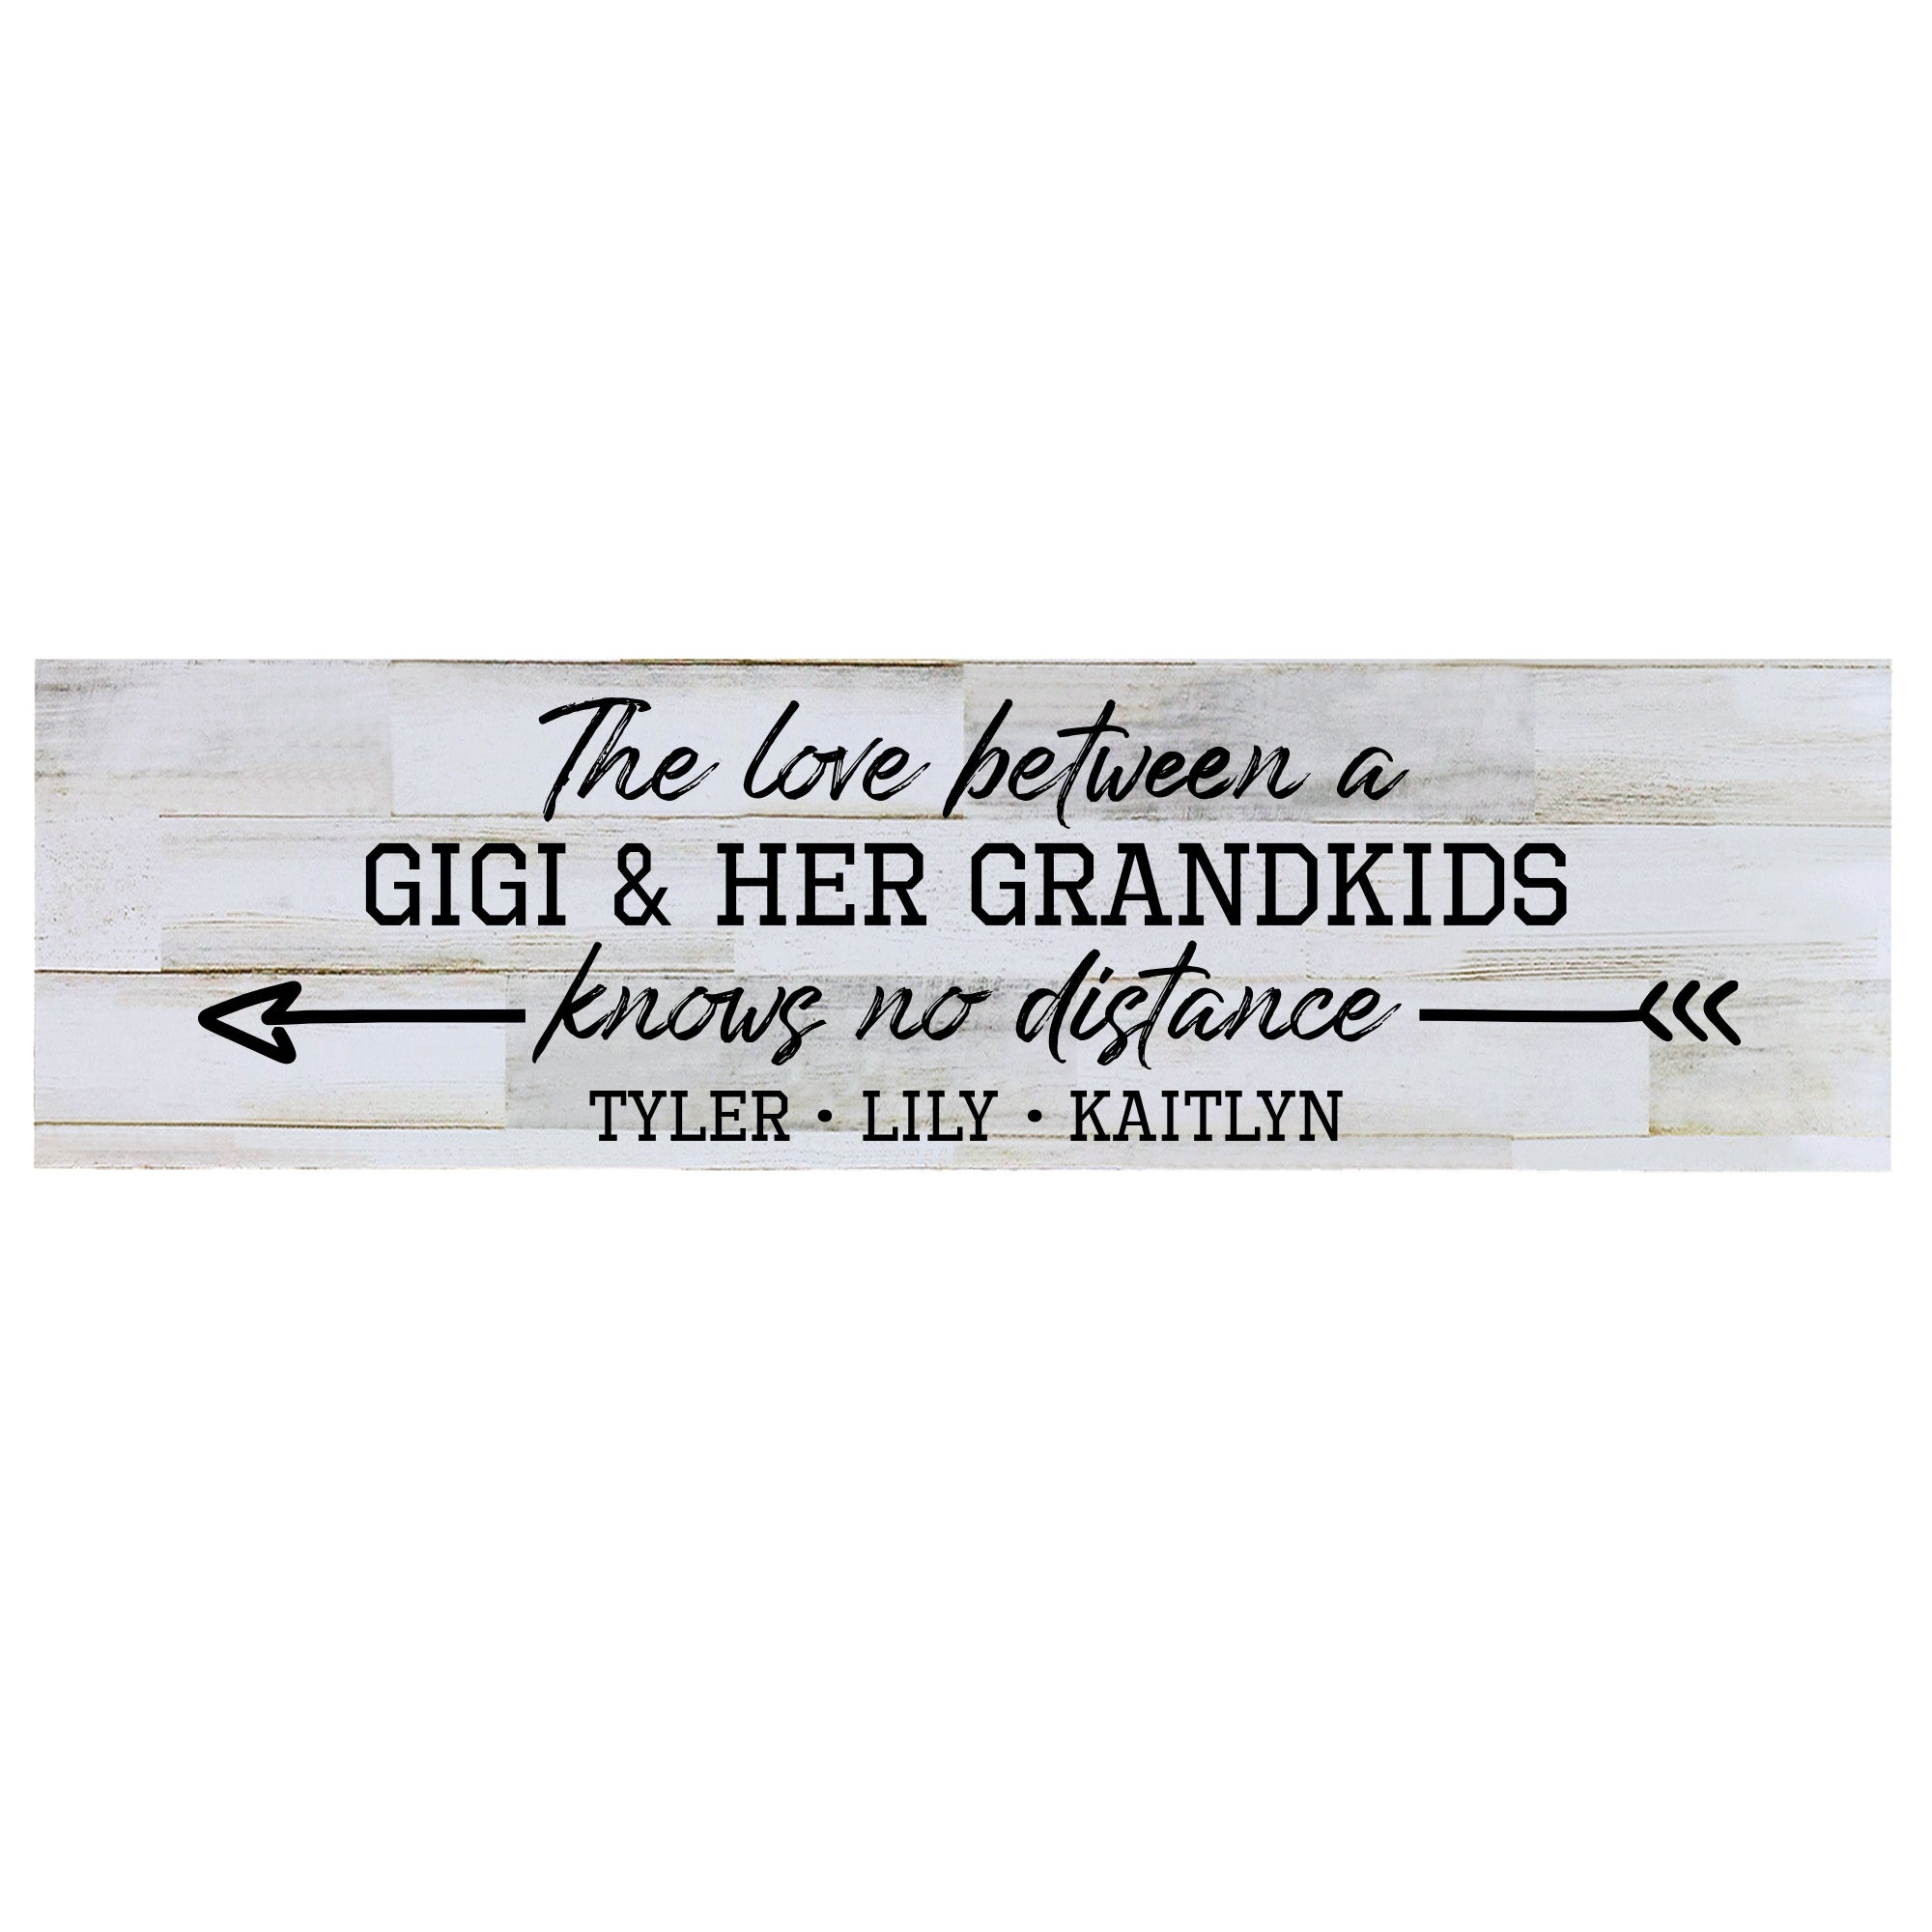 Personalized Mother's Day Barn Wood Sign Gift - The Love Between - LifeSong Milestones